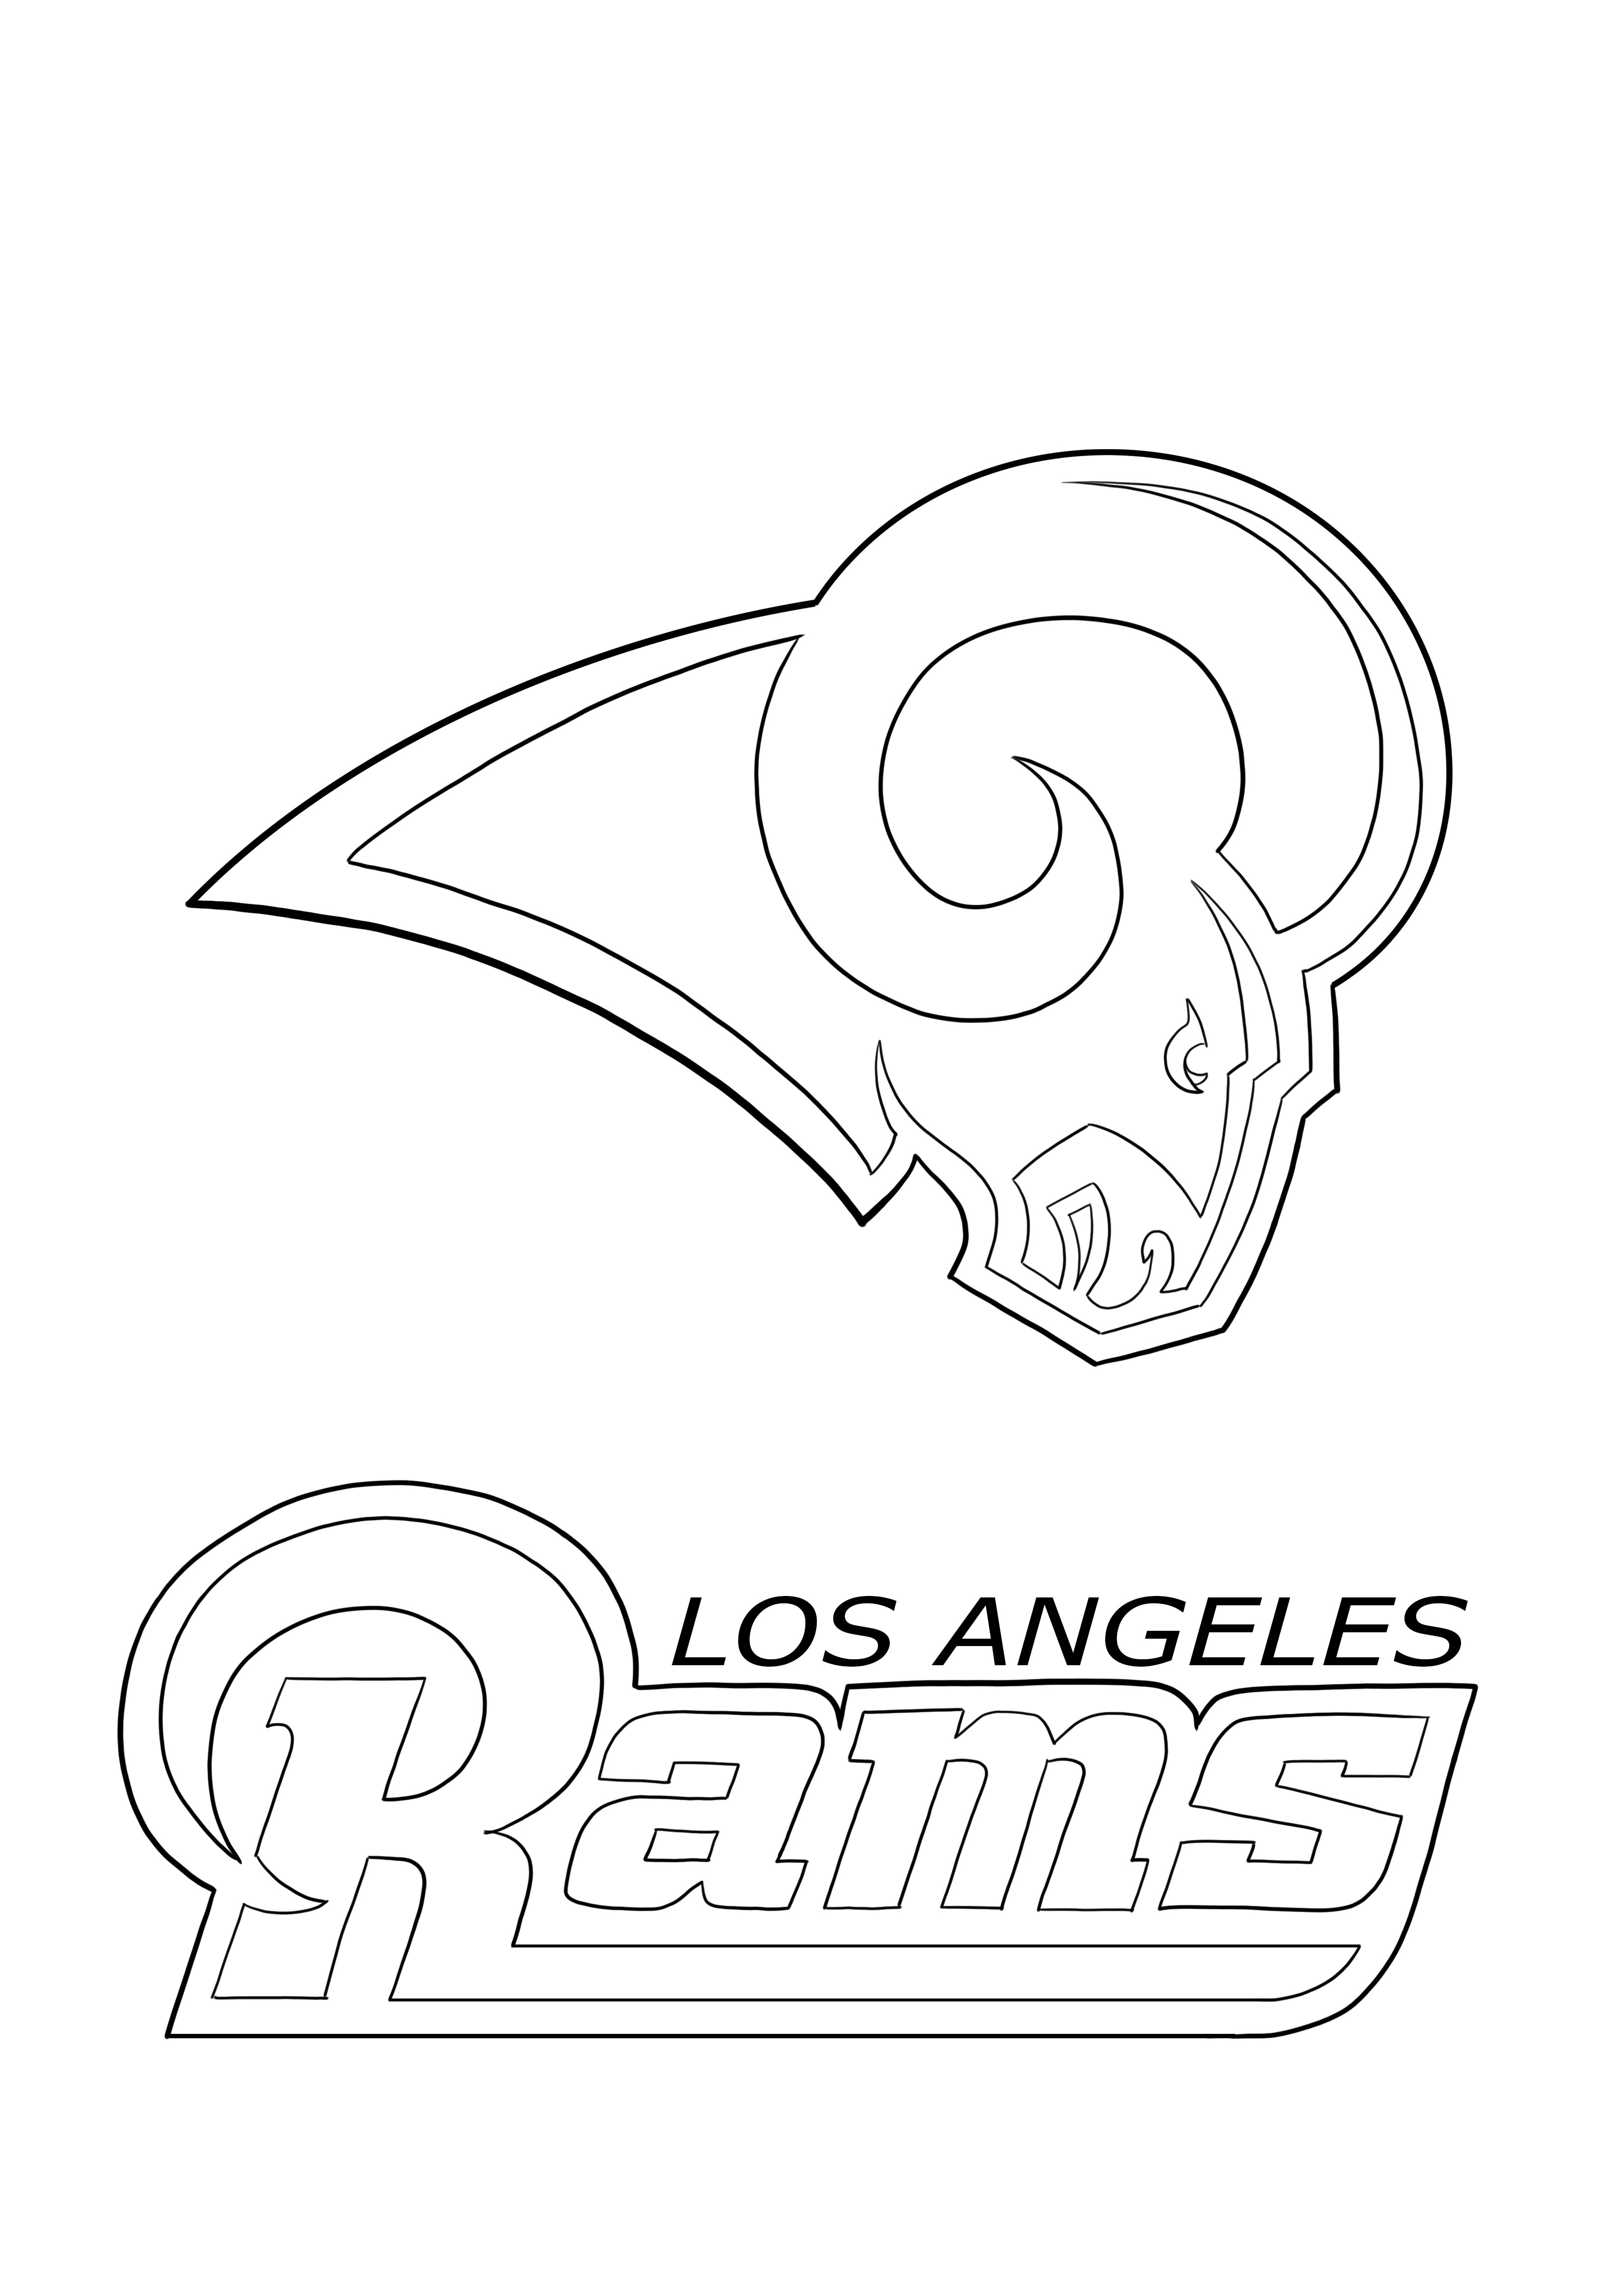 Los Angeles Rams coloring and free downloading